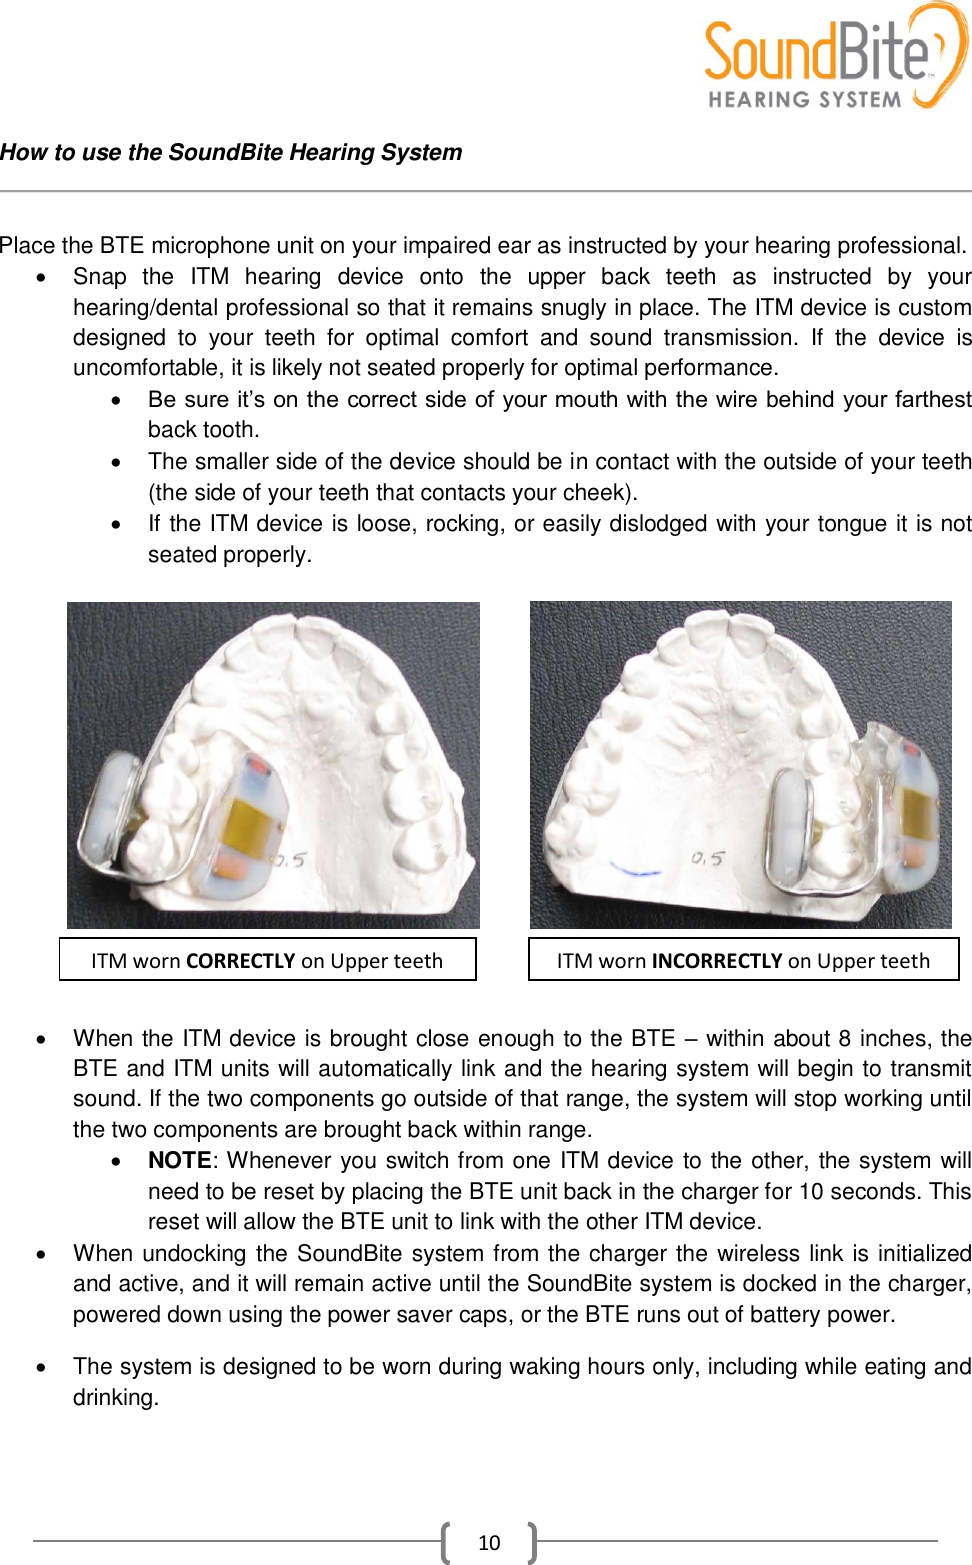    10 How to use the SoundBite Hearing System   Place the BTE microphone unit on your impaired ear as instructed by your hearing professional.   Snap  the  ITM  hearing  device  onto  the  upper  back  teeth  as  instructed  by  your hearing/dental professional so that it remains snugly in place. The ITM device is custom designed  to  your  teeth  for  optimal  comfort  and  sound  transmission.  If  the  device  is uncomfortable, it is likely not seated properly for optimal performance.  Be sure it’s on the correct side of your mouth with the wire behind your farthest back tooth.    The smaller side of the device should be in contact with the outside of your teeth (the side of your teeth that contacts your cheek).   If the ITM device is loose, rocking, or easily dislodged with your tongue it is not seated properly.                           When the ITM device is brought close enough to the BTE – within about 8 inches, the BTE and ITM units will automatically link and the hearing system will begin to transmit sound. If the two components go outside of that range, the system will stop working until the two components are brought back within range.  NOTE: Whenever you switch from one ITM device to the other, the system will need to be reset by placing the BTE unit back in the charger for 10 seconds. This reset will allow the BTE unit to link with the other ITM device.    When undocking the SoundBite system from the charger the wireless link is initialized and active, and it will remain active until the SoundBite system is docked in the charger, powered down using the power saver caps, or the BTE runs out of battery power.    The system is designed to be worn during waking hours only, including while eating and drinking. ITM worn CORRECTLY on Upper teeth ITM worn INCORRECTLY on Upper teeth 